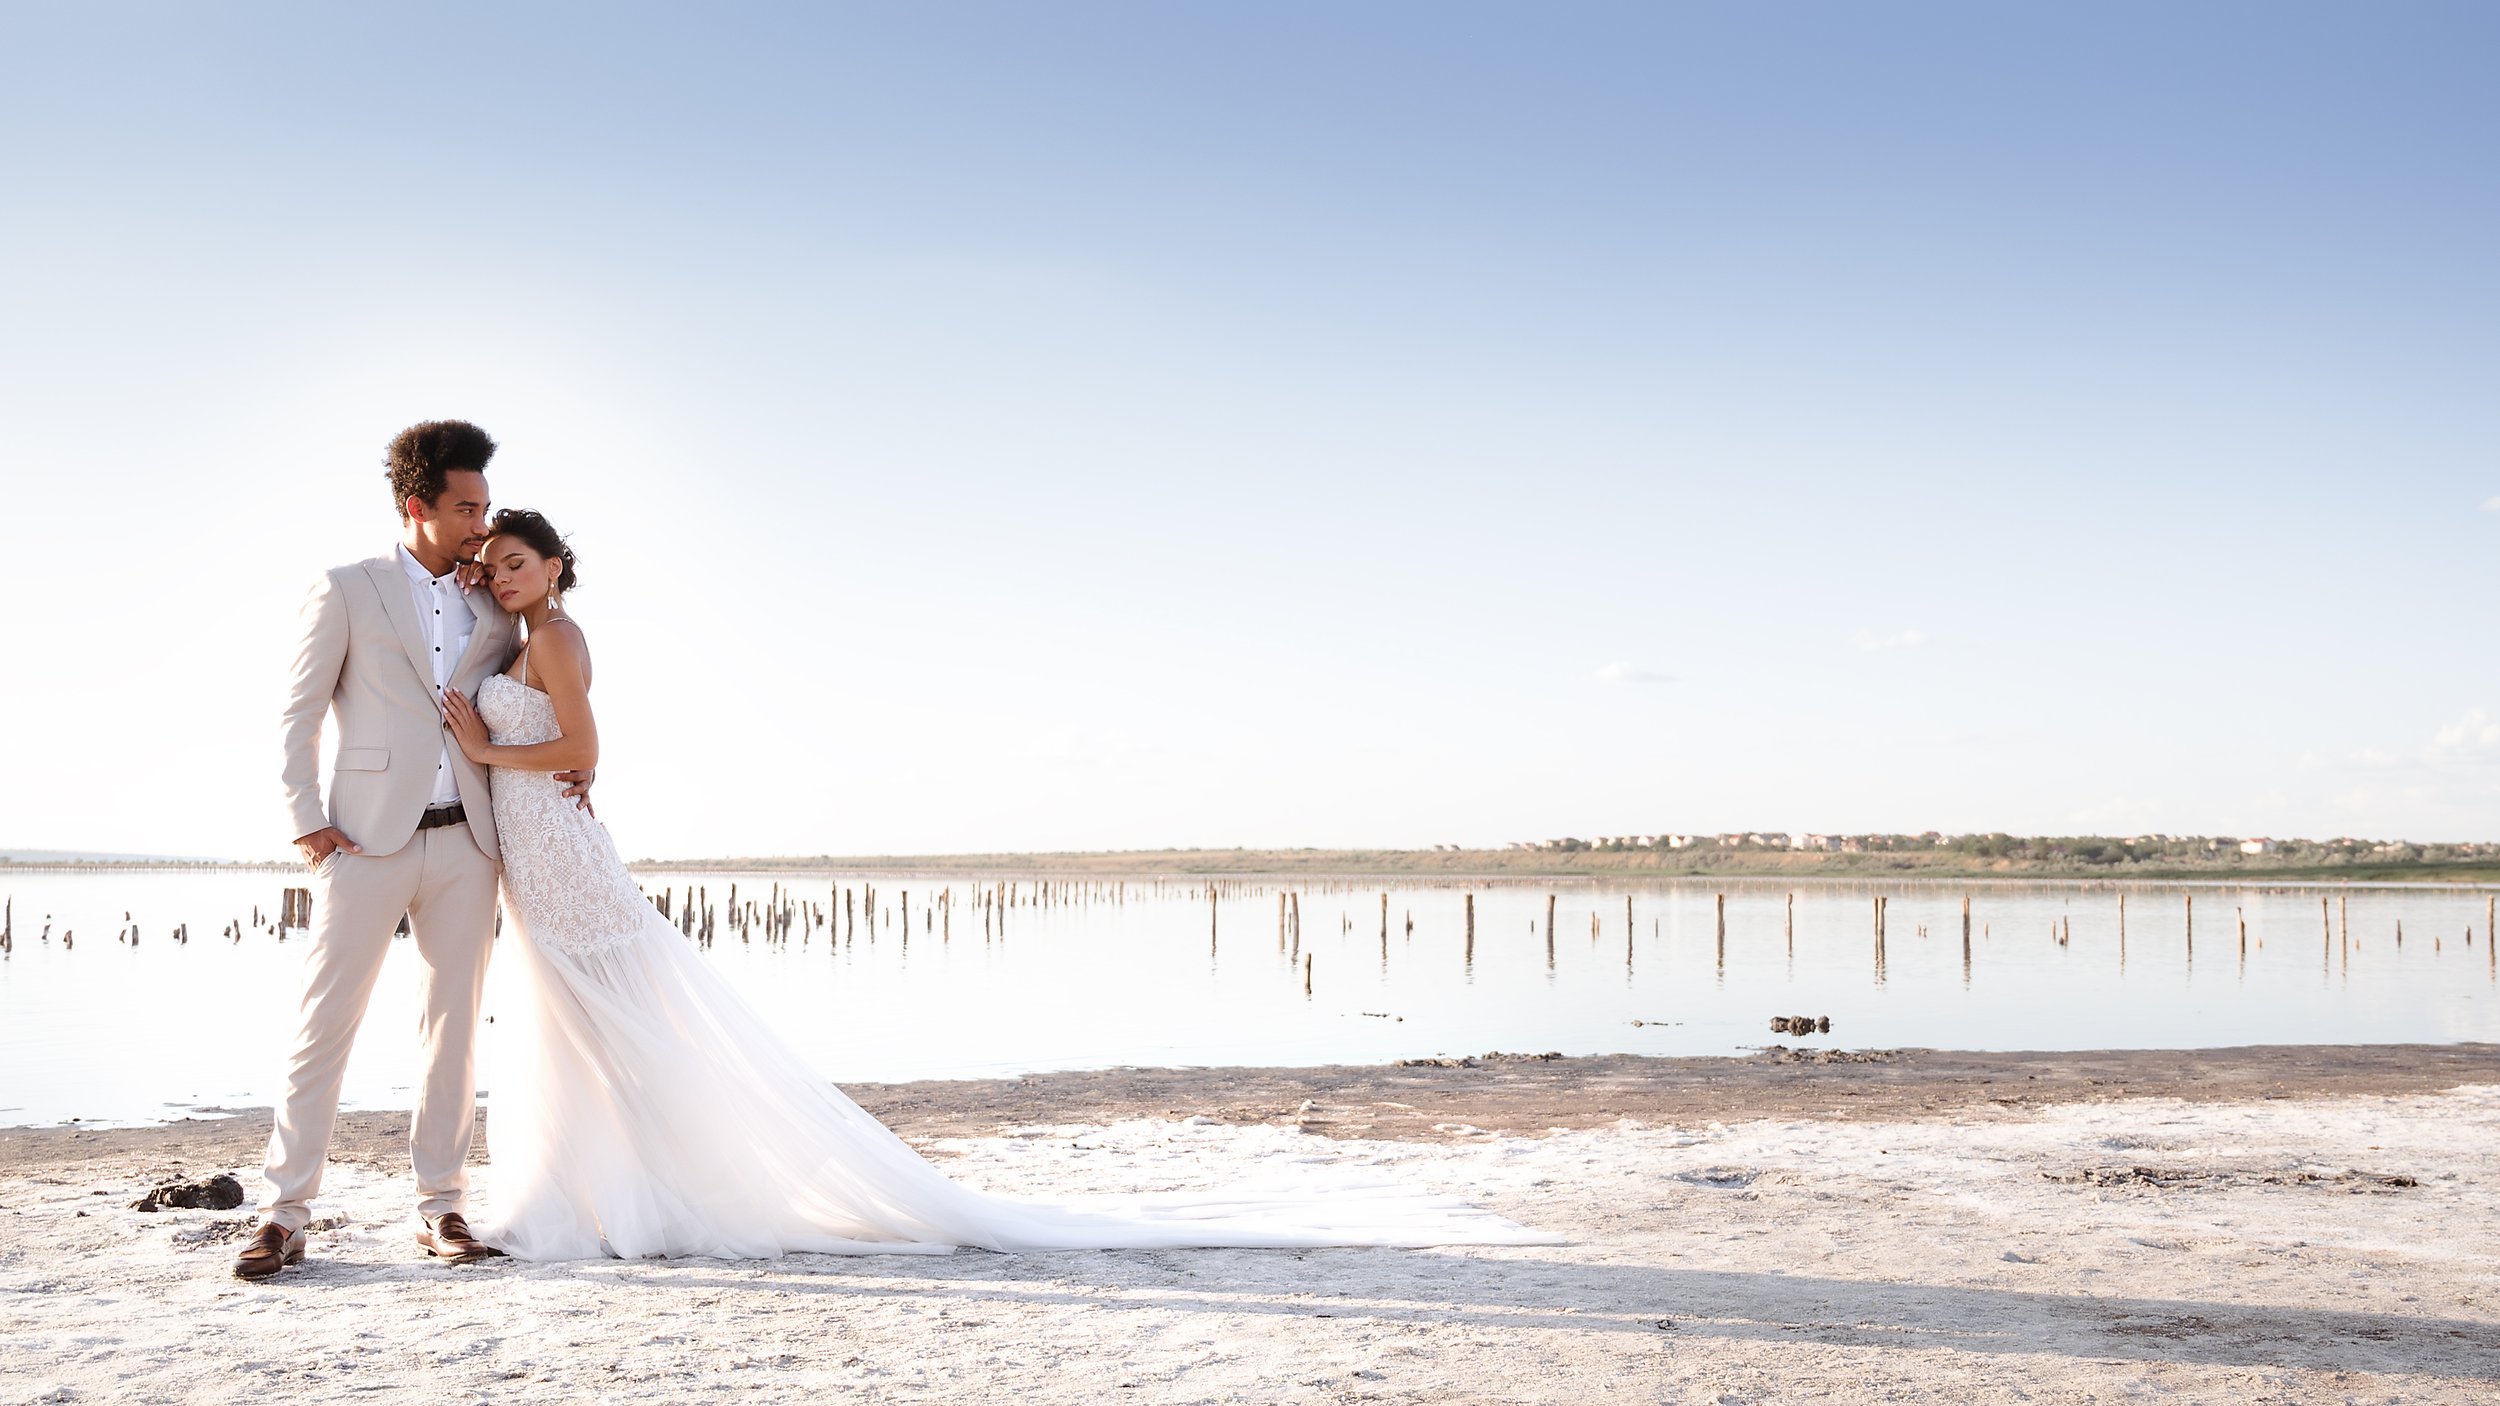  Under a clear blue sky the bride and groom are stood on the beach. The bride is leaning into the groom with her head resting on his shoulder and the groom has his left arm around the bride and is other hand in his pocket.  The groom is wearing a cre